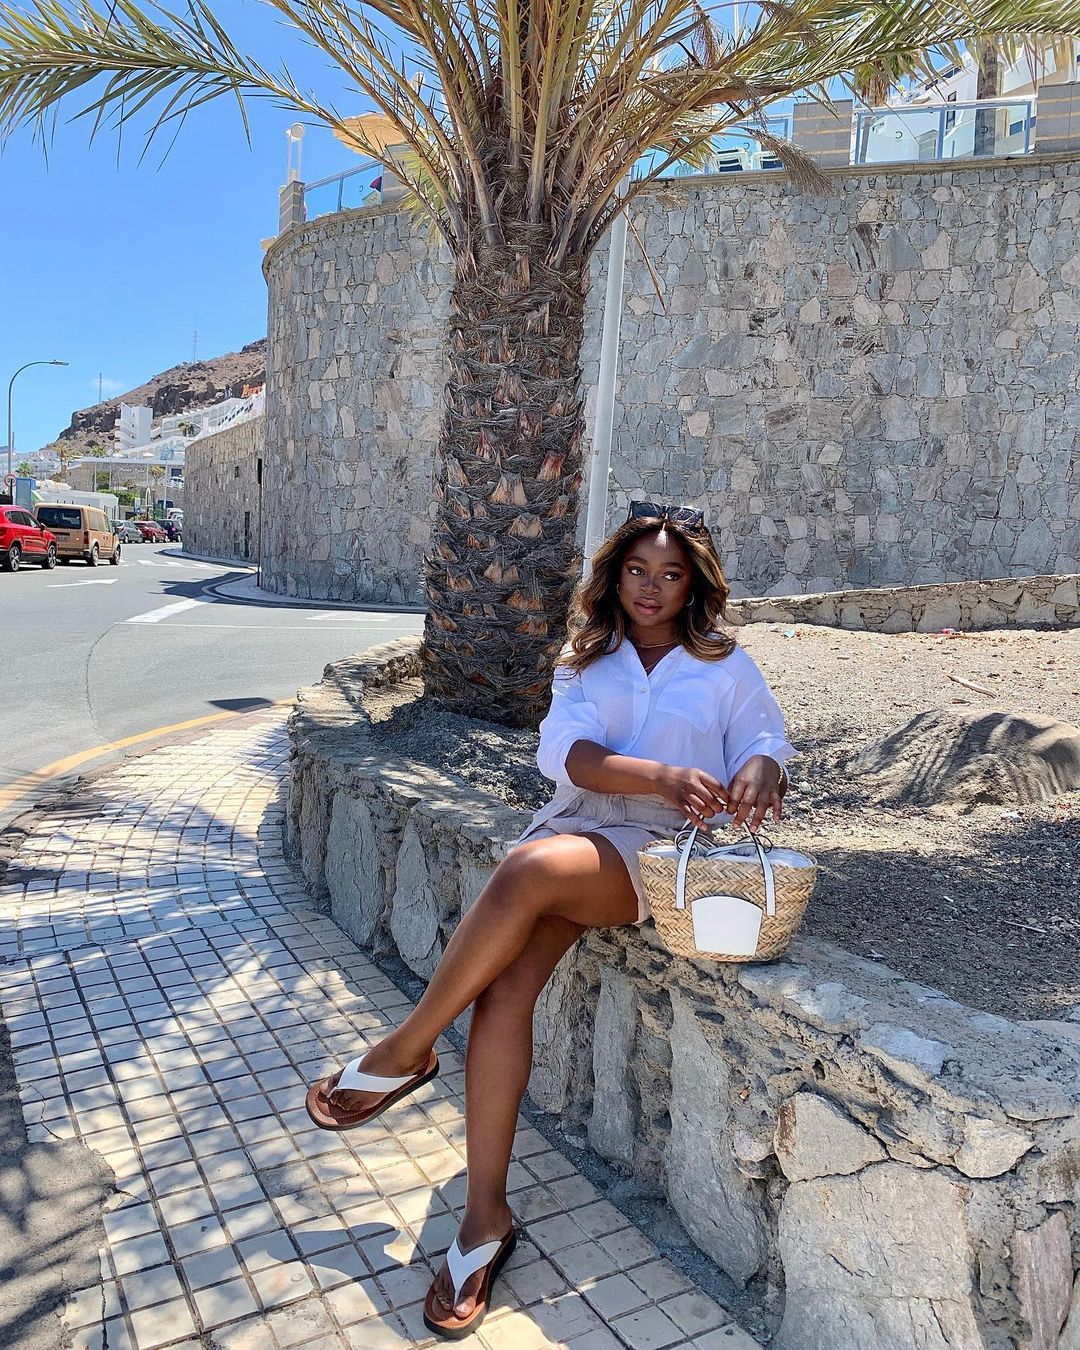 Marks and Spencer summer shoes: @evody.onesi wears a pair of white toe-post sandals from Marks & Spencer